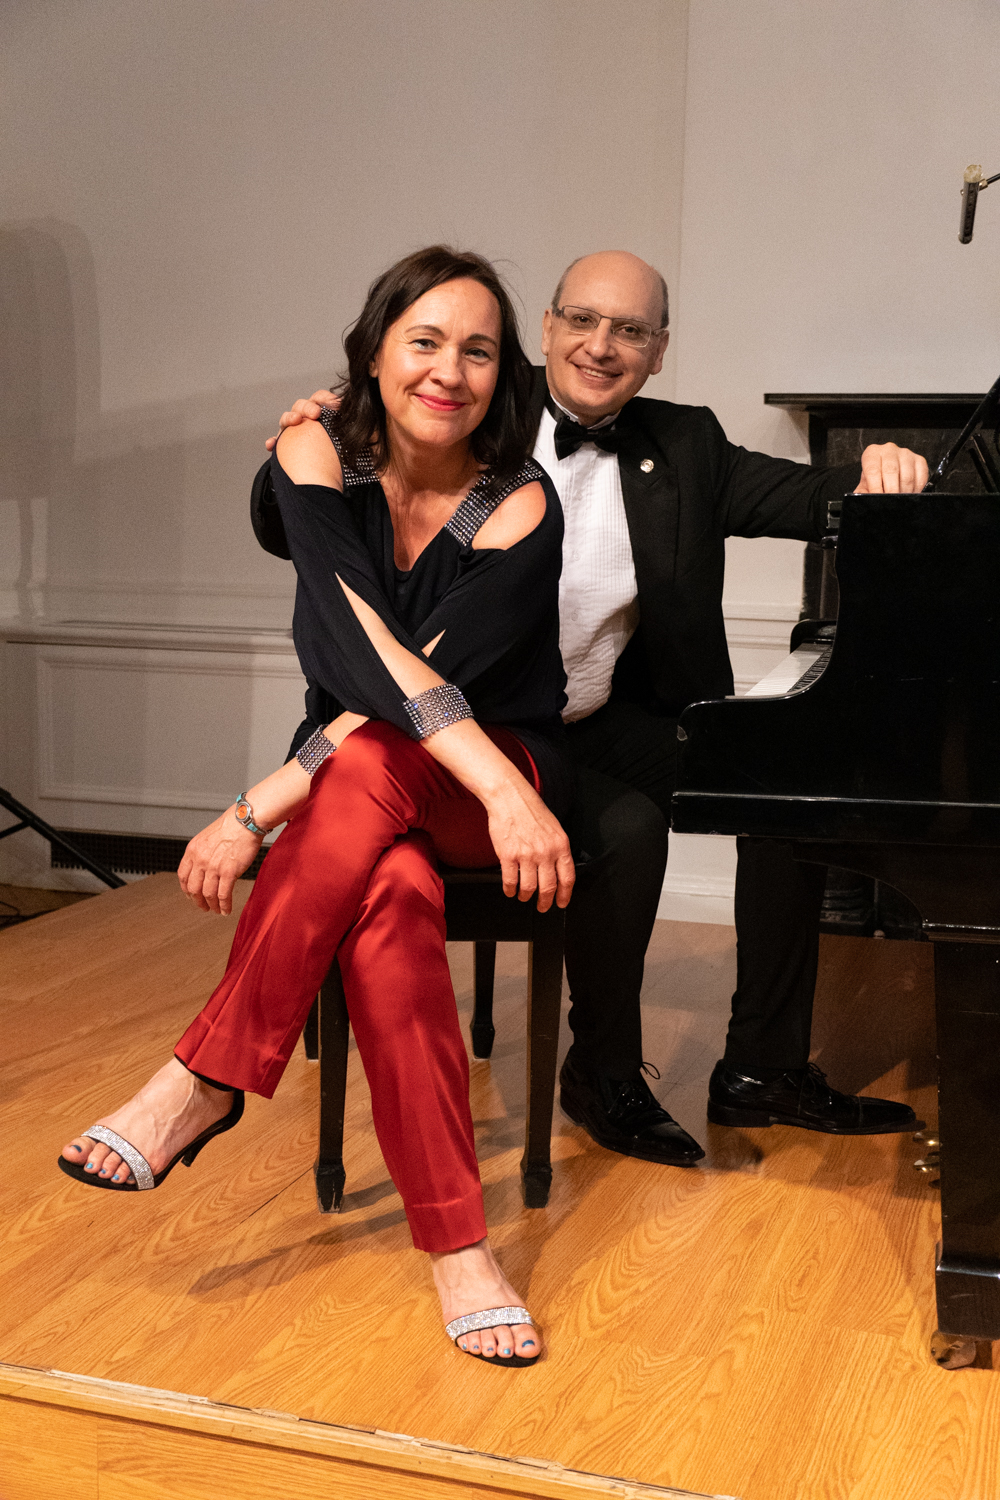 A photo of pianists Evelyn Ulex and Pablo Lavandera posing on a piano bench.